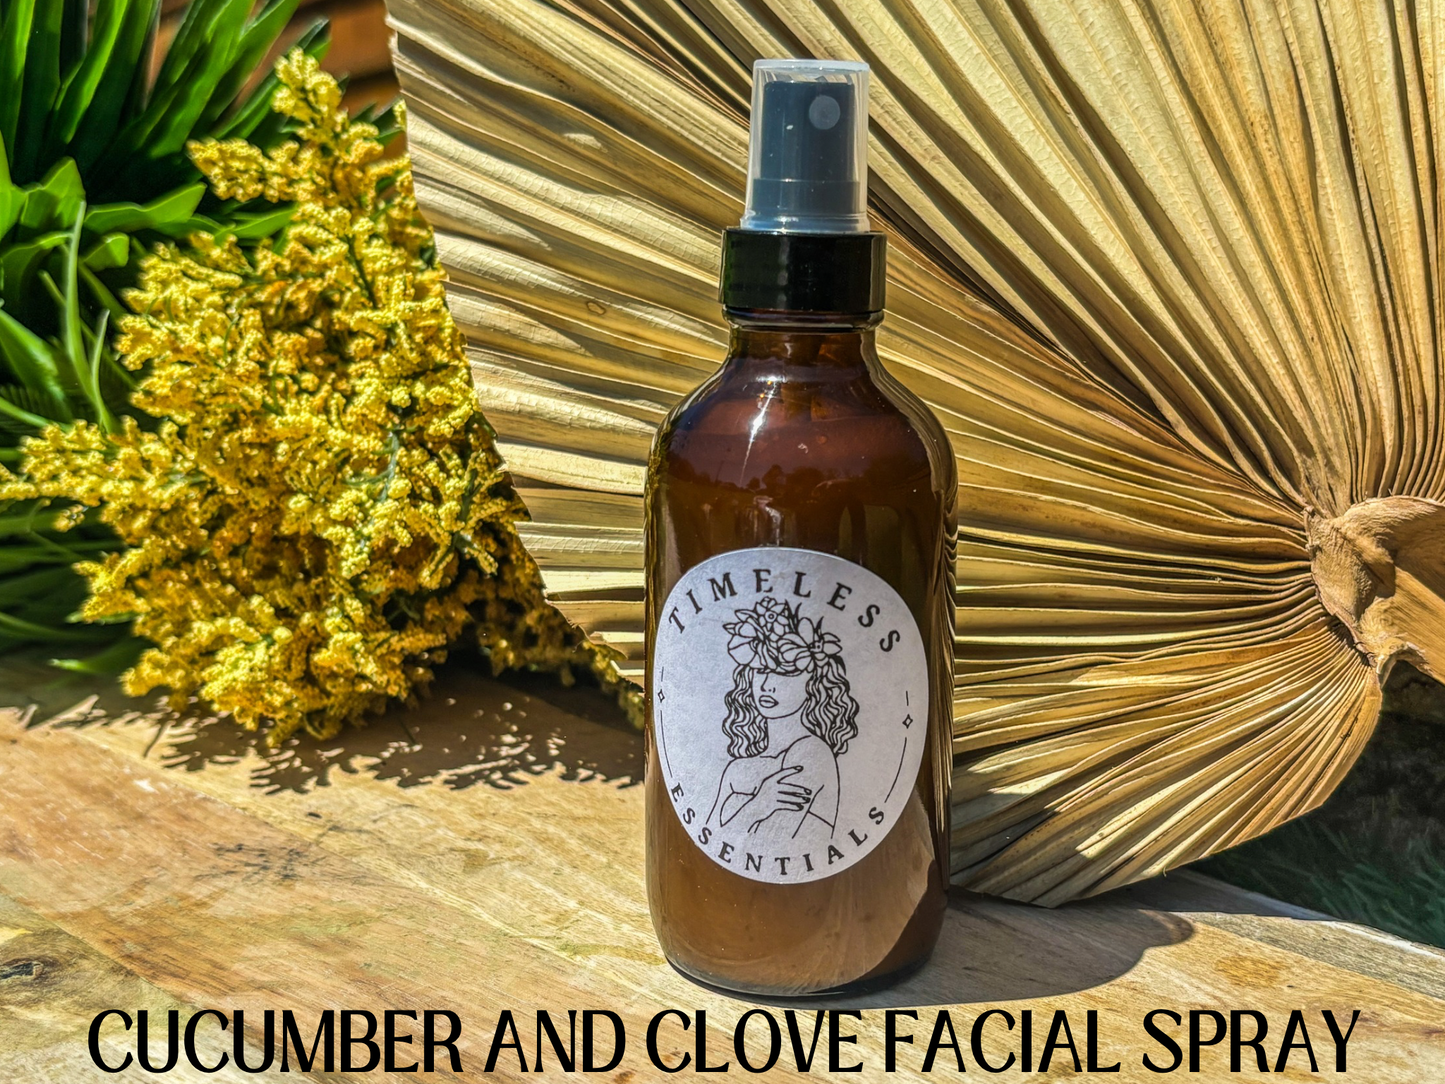 Cucumber Water infused with Clove Facial Spray